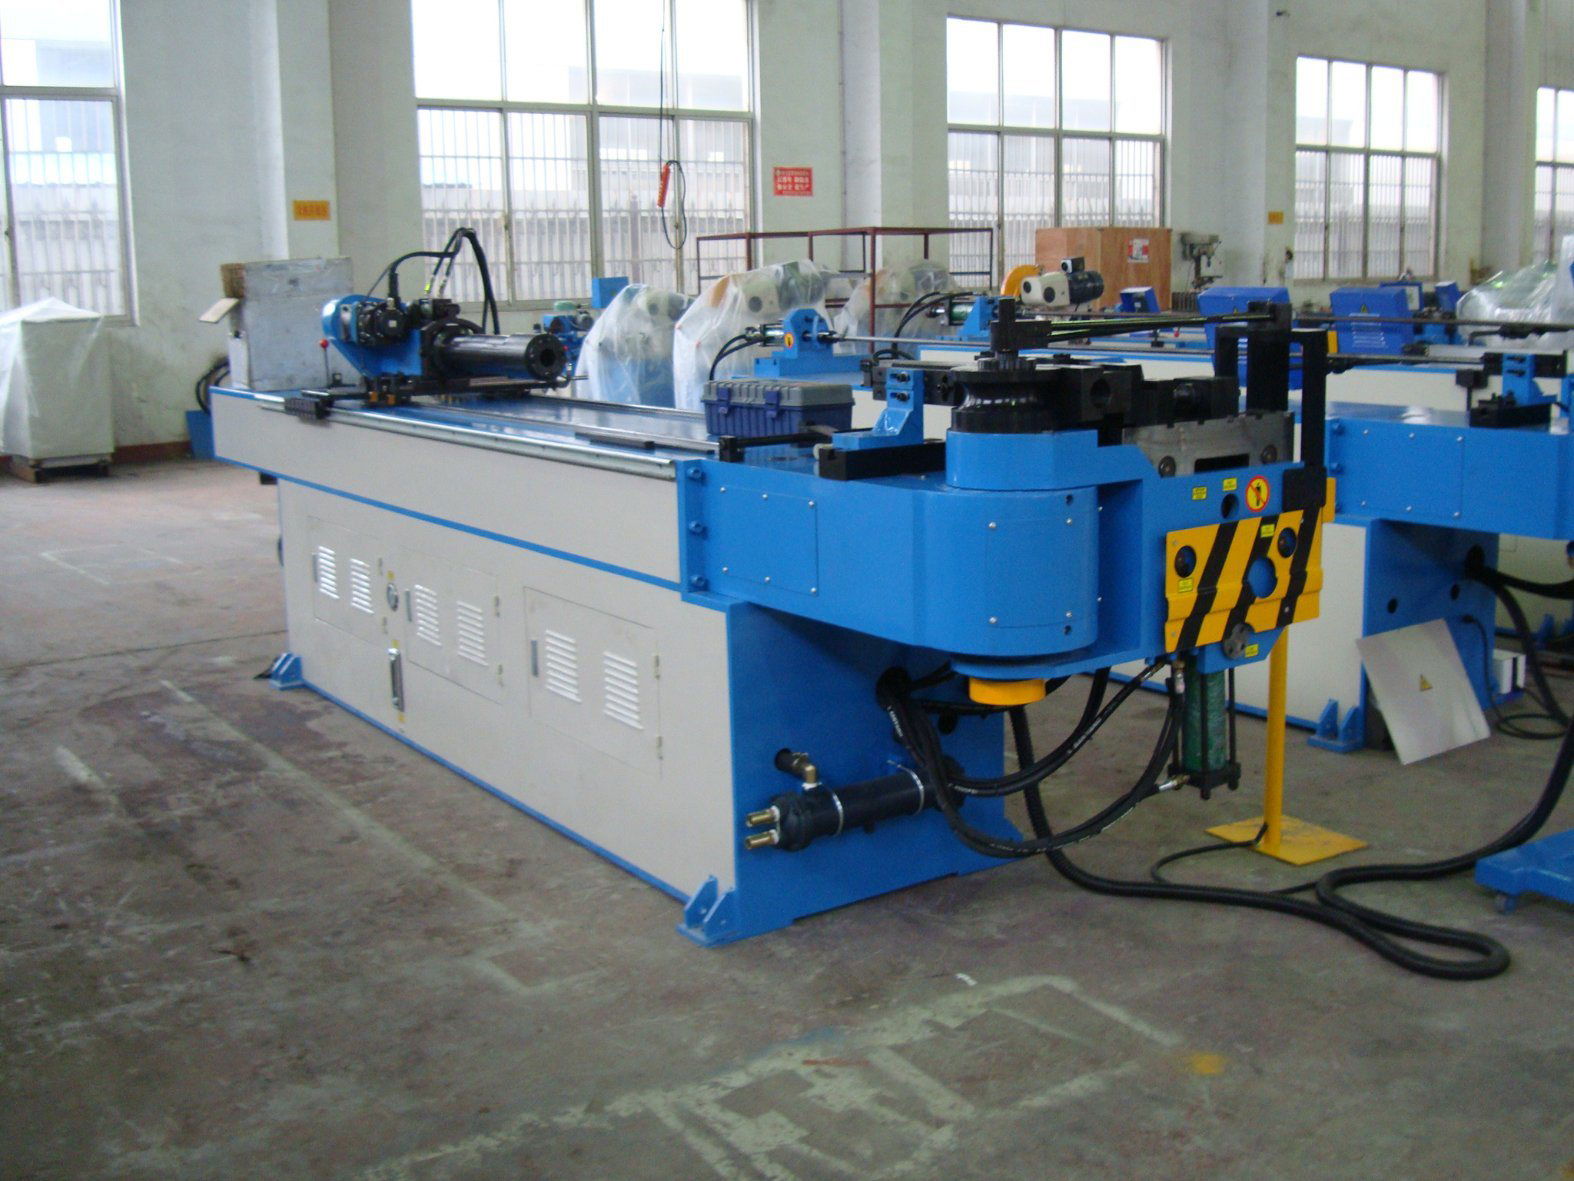 The application of CNC tube bending machine in the industry